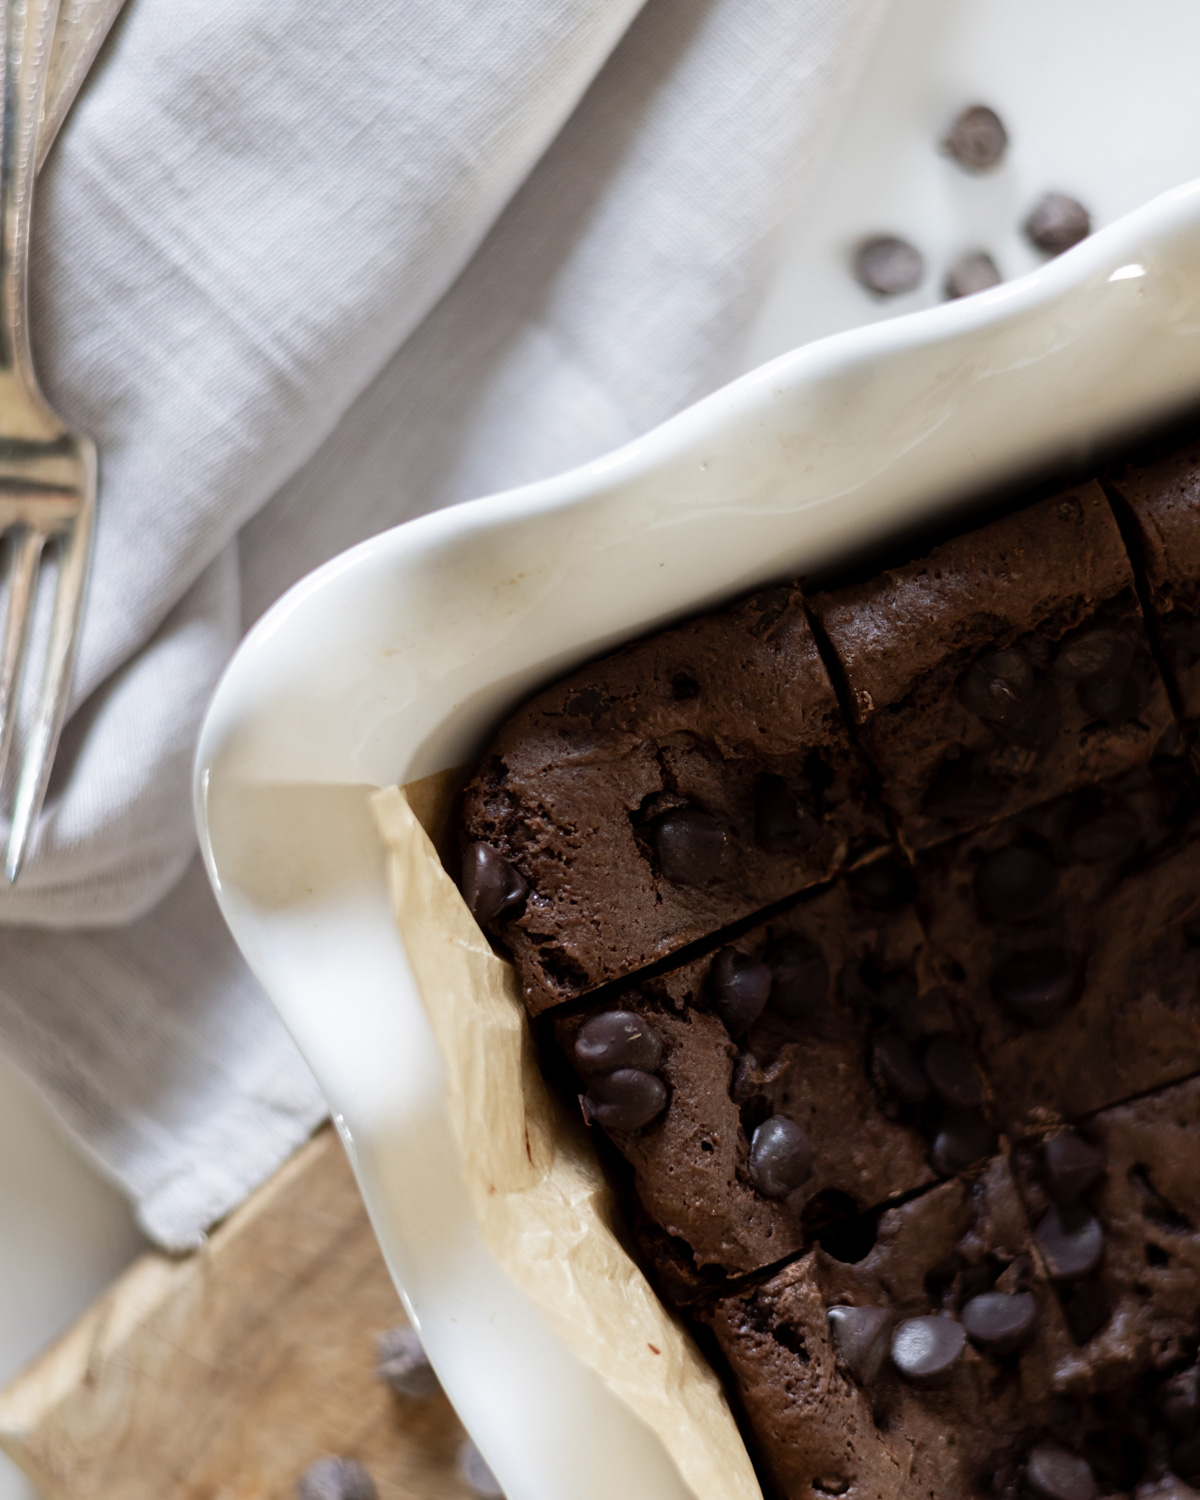 Indulgent brownies in a ruffled Emile Henry baking dish.